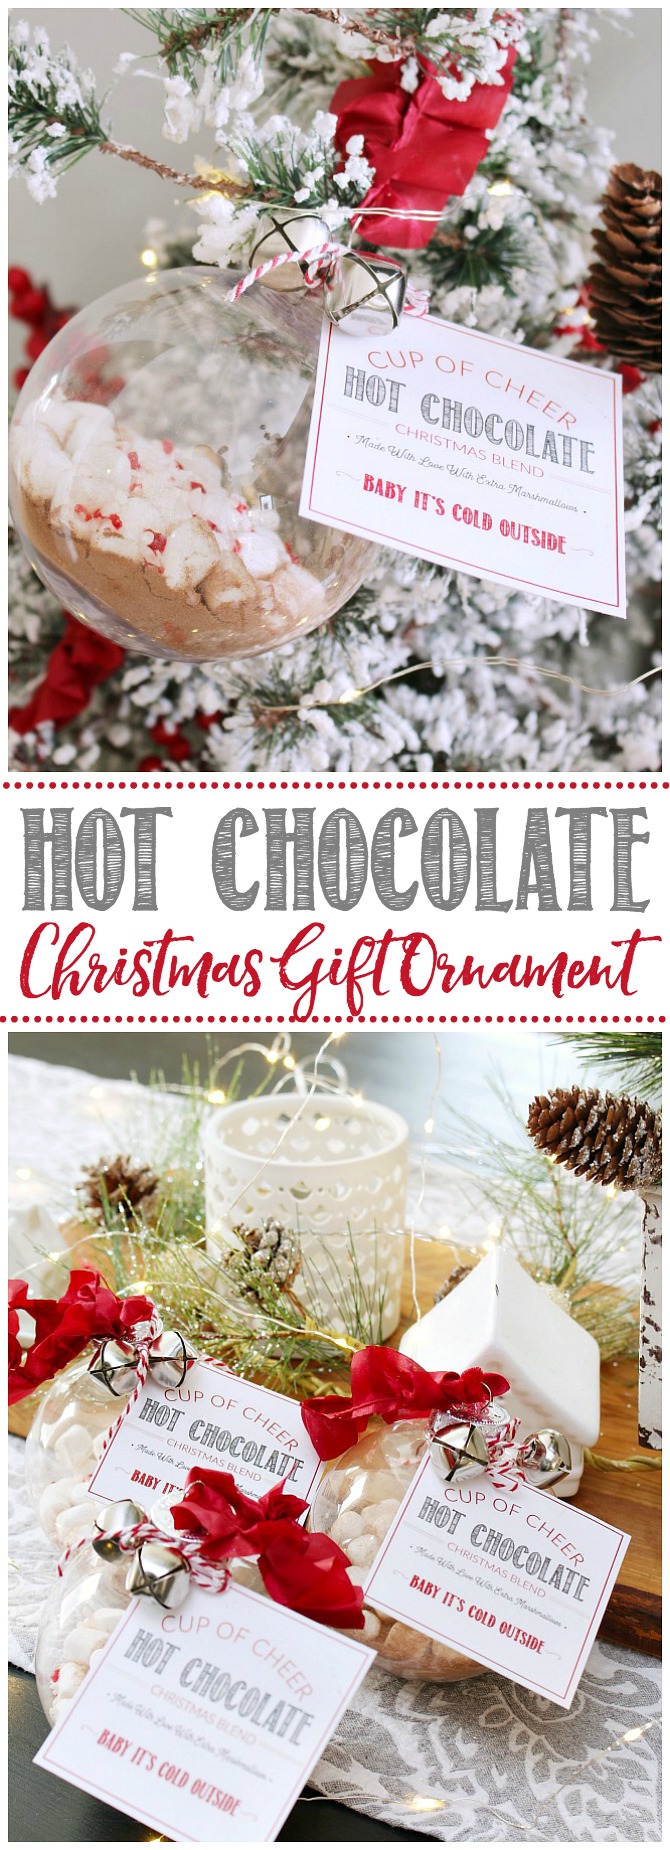 Hot chocolate gift ornament hanging on a Christmas tree. Tied with ribbon, jungle bells and a free printable hot chocolate tag. Cute Christmas gift idea!